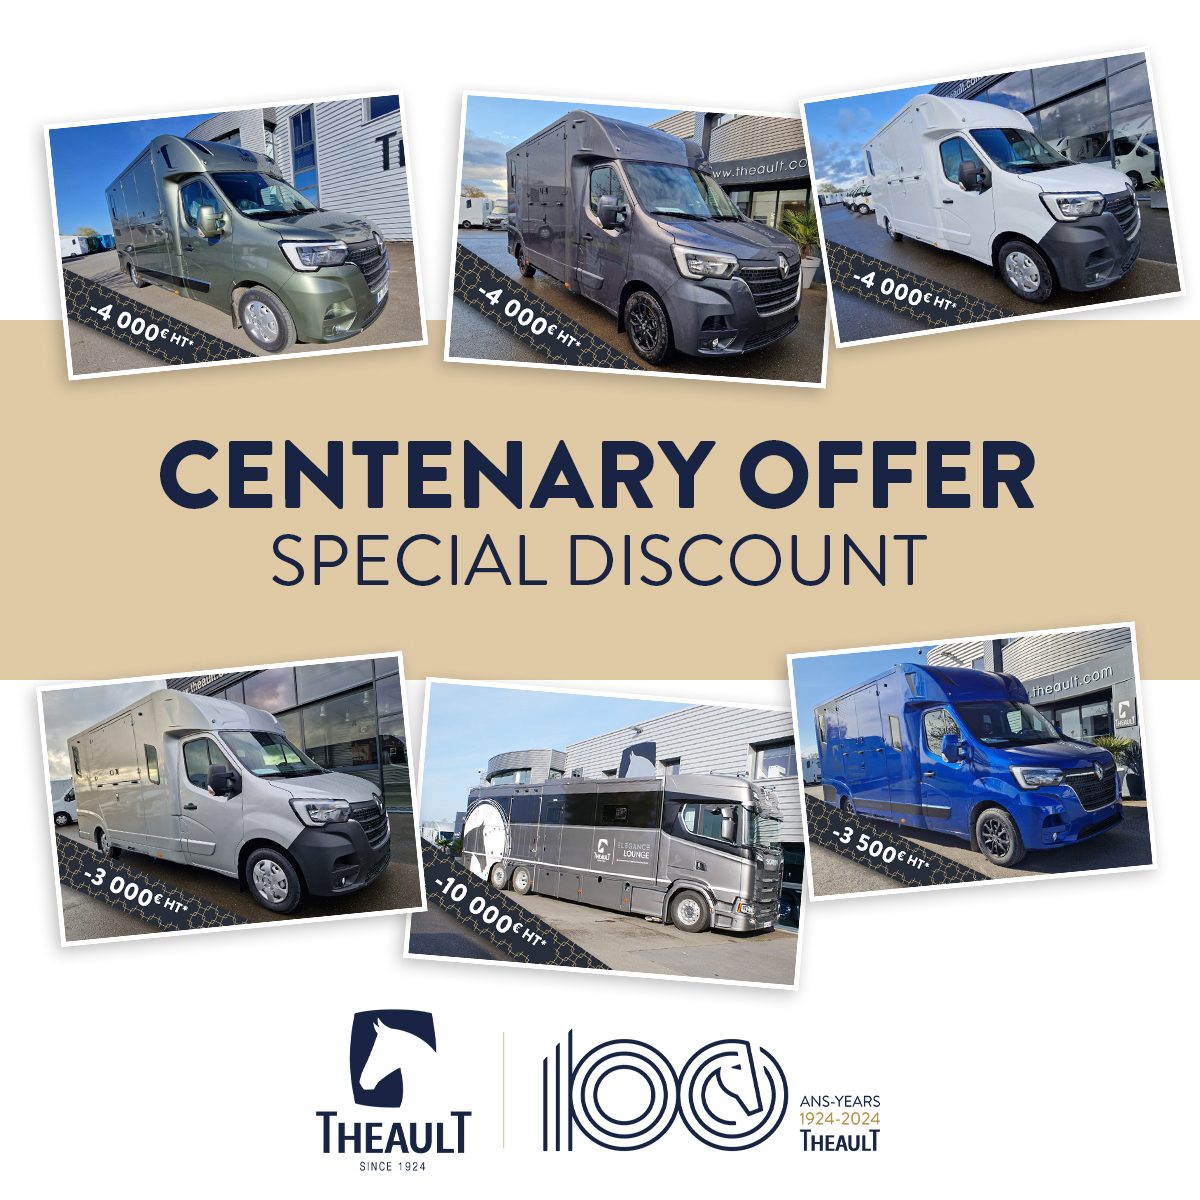 Our historic offer is still available abroad until 30 April inclusive! Visit theault.com to find out more about the vehicles concerned and the terms and conditions of the offer... #theault #offrehistorique #centenaryoffer #centenary #madeinfrance